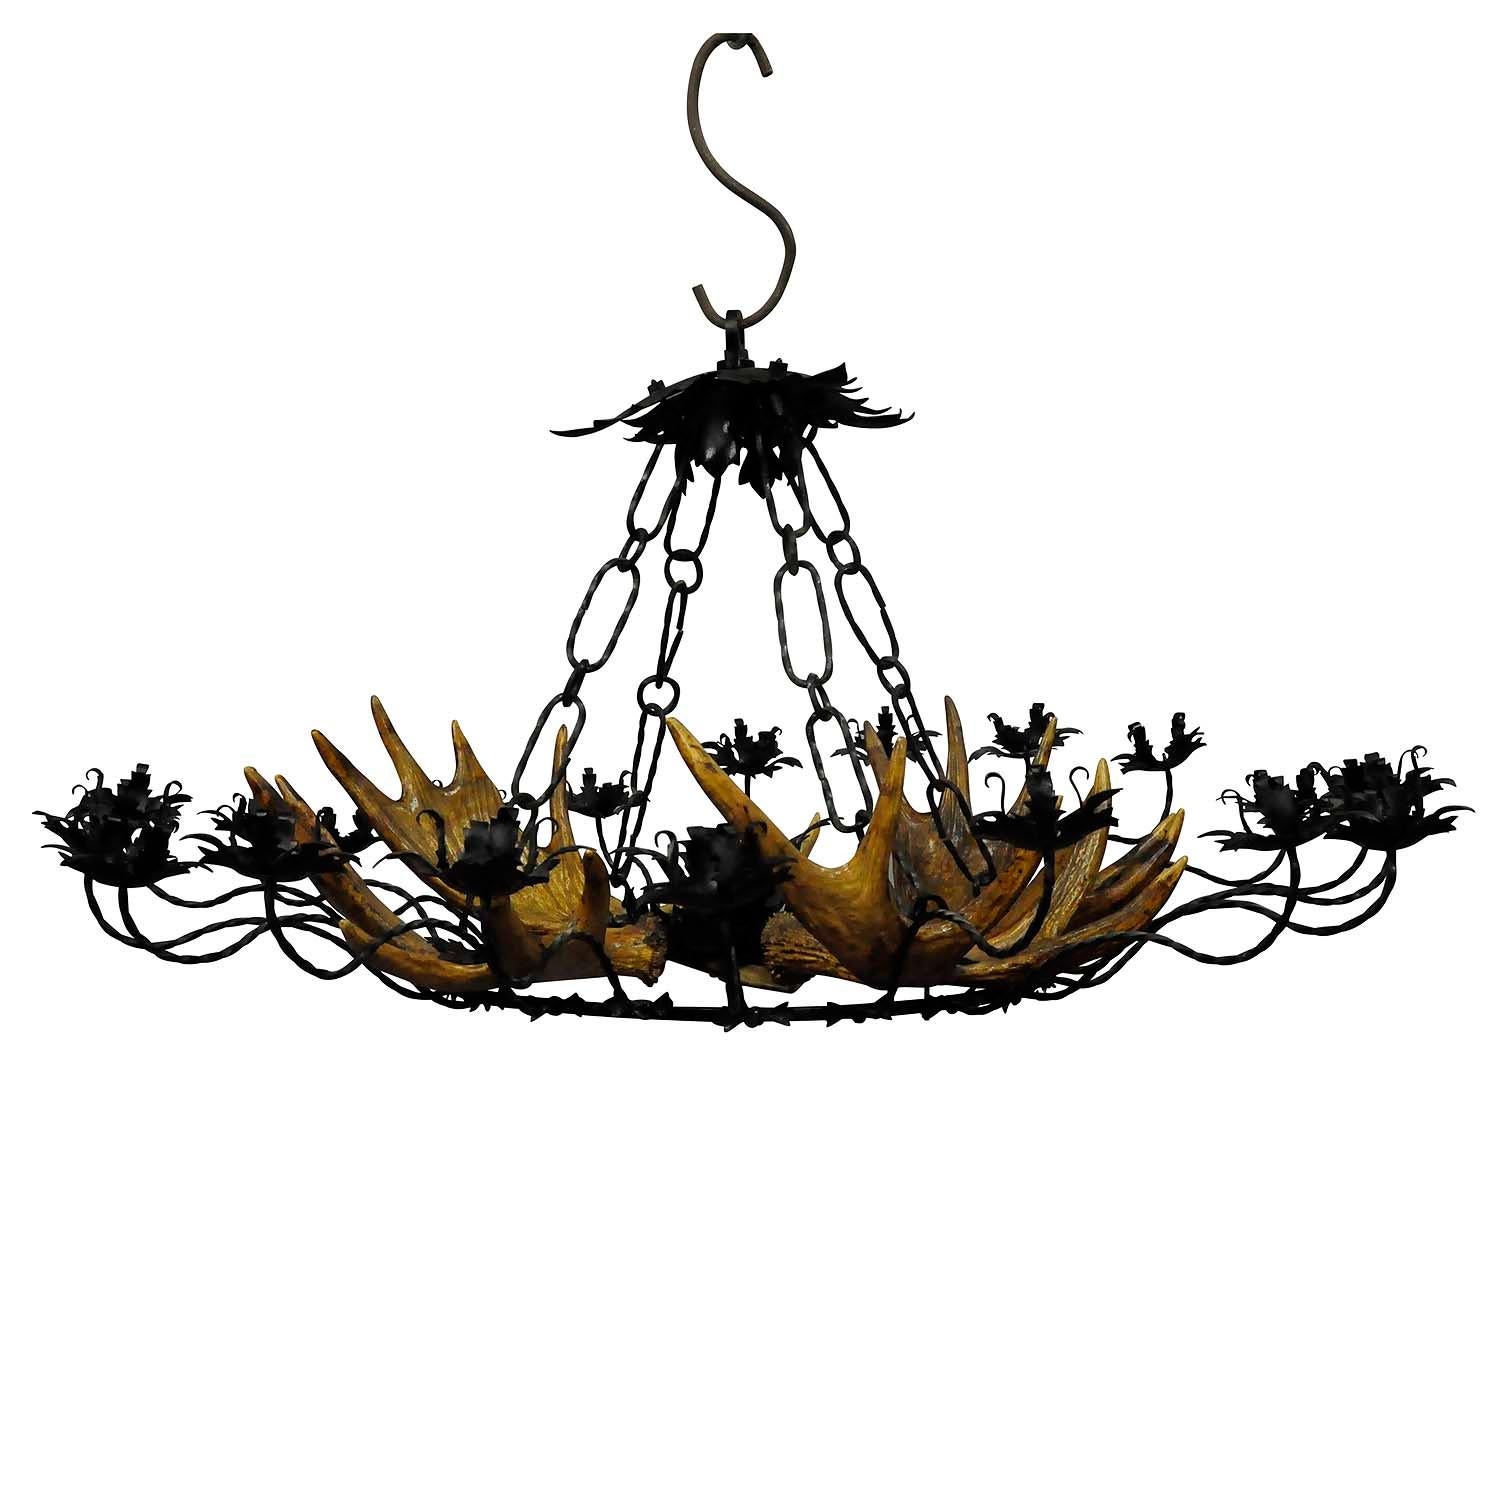 Vintage Antler Chandelier with Forged Iron Suspension

A beautiful filigree forged iron chandelier with 4 large elk antlers. Manufactured in Germany ca. 1950s. The chandelier features 20 spouts for candles and is not electrified. The suspension is